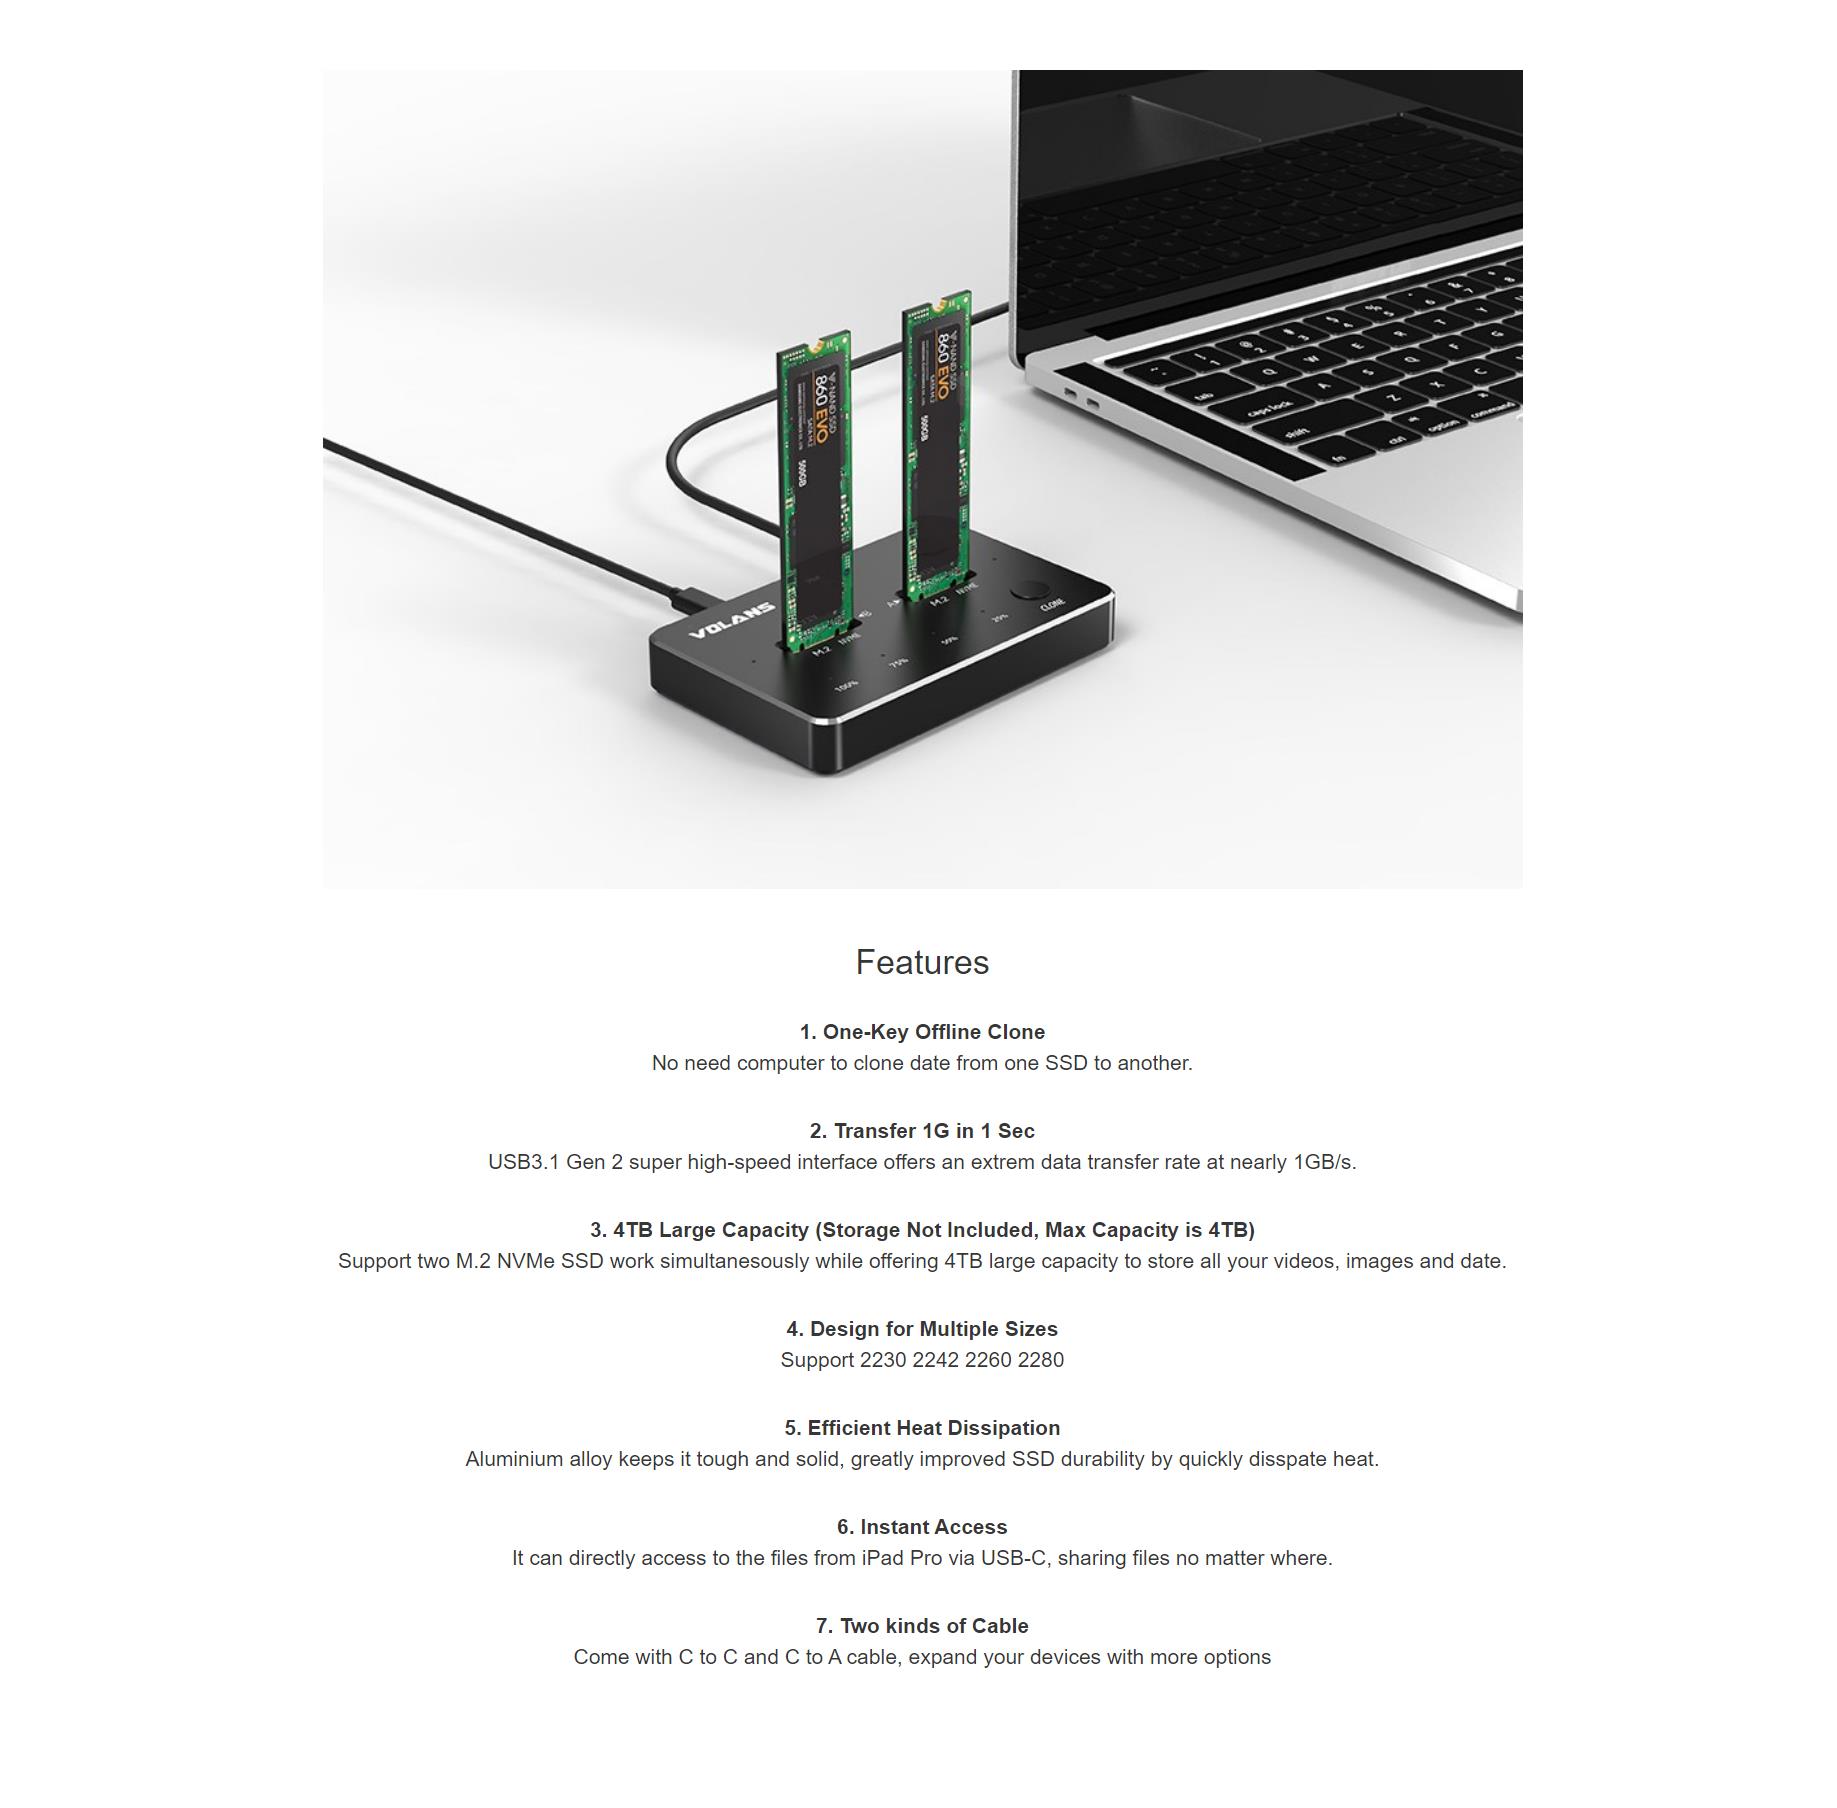 A large marketing image providing additional information about the product Volans Aluminium 2-Bay USB-C NVMe PCIe SSD Docking Station - Additional alt info not provided